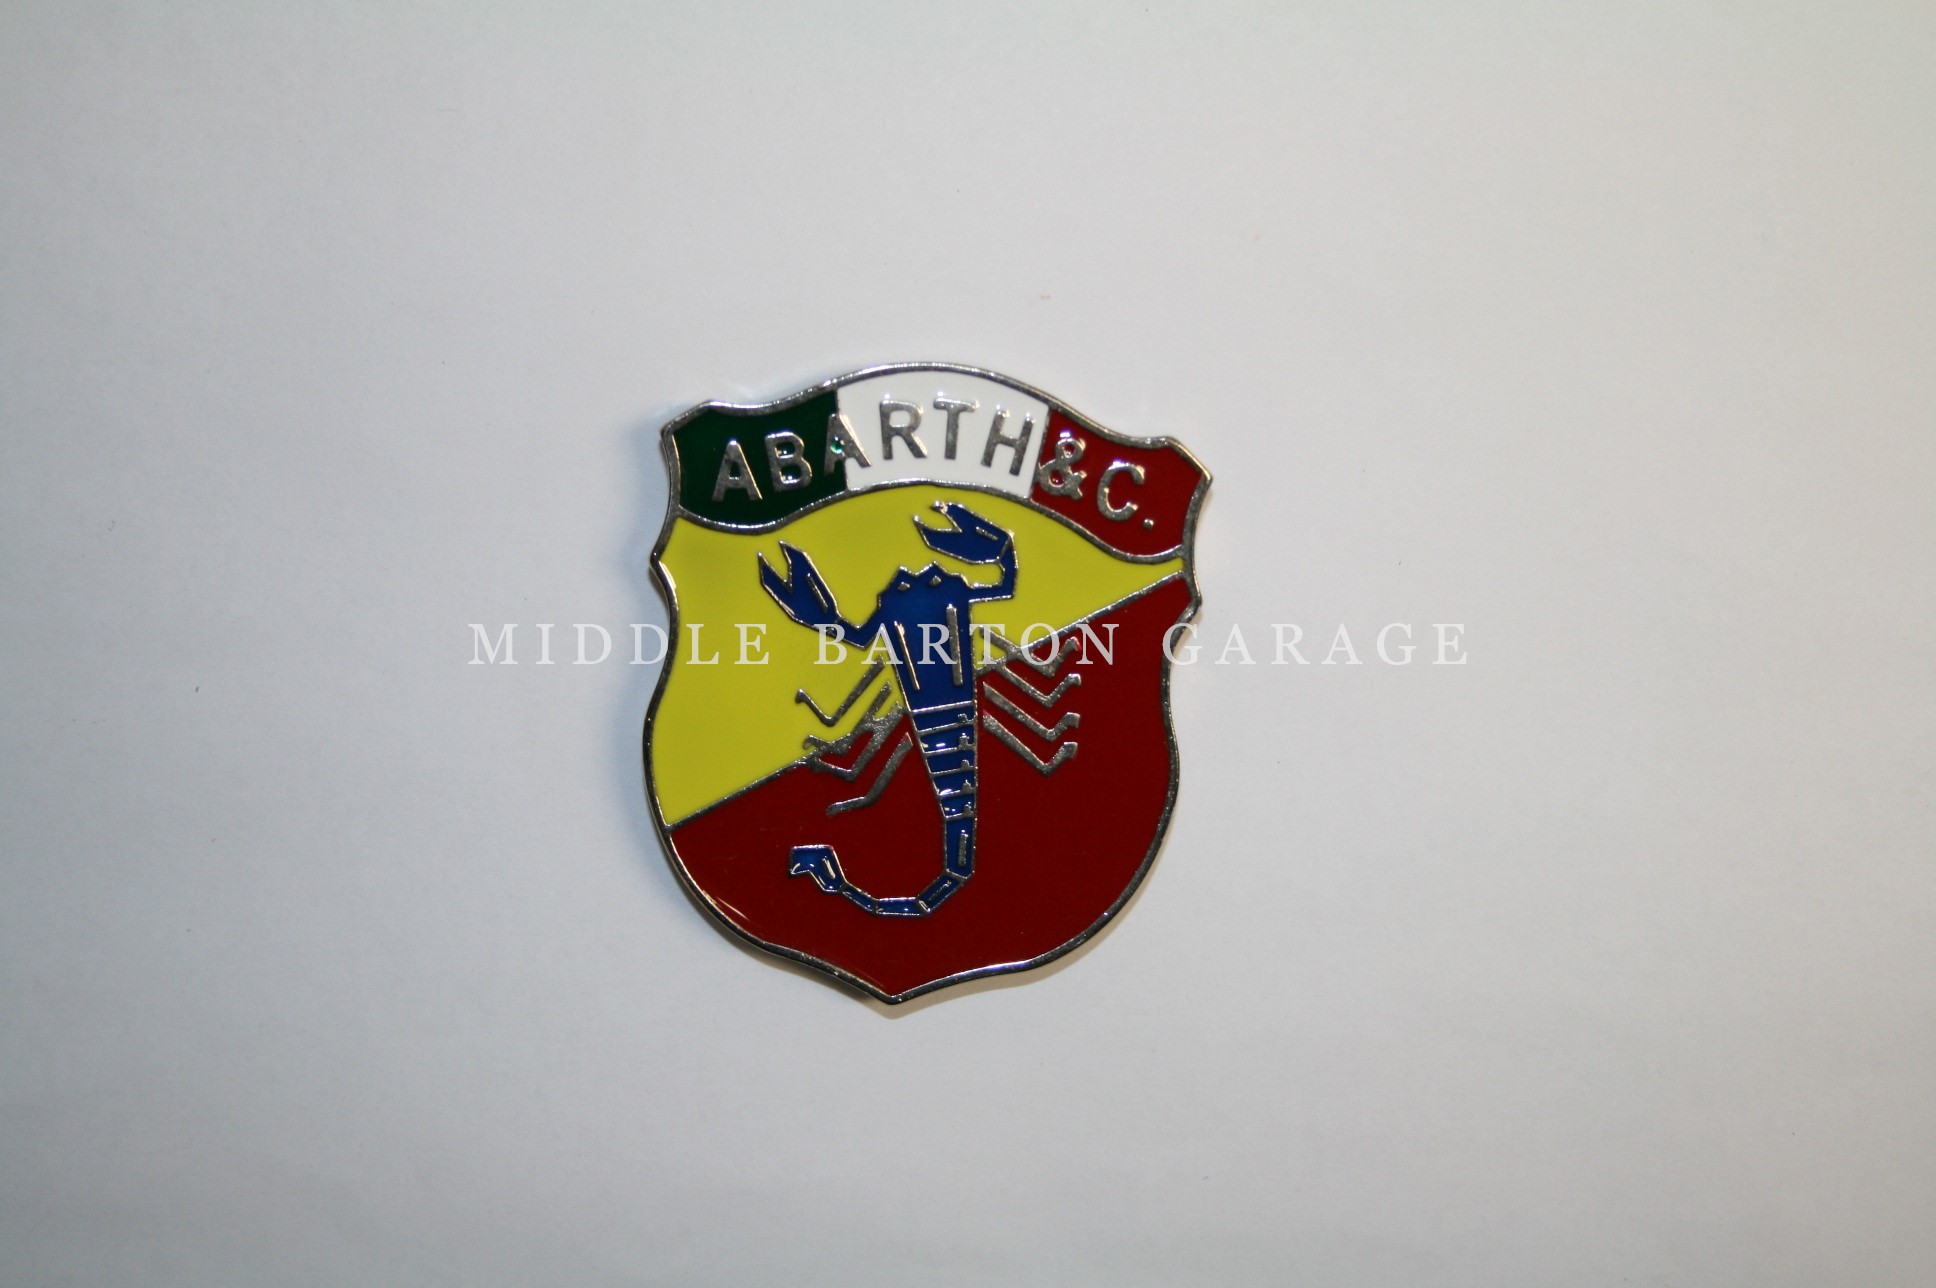 FIAT ABARTH "ABARTH" SHIELD RED BLUE YELLOW BLACK LOGO JACKET SHIRT HAT PATCH 